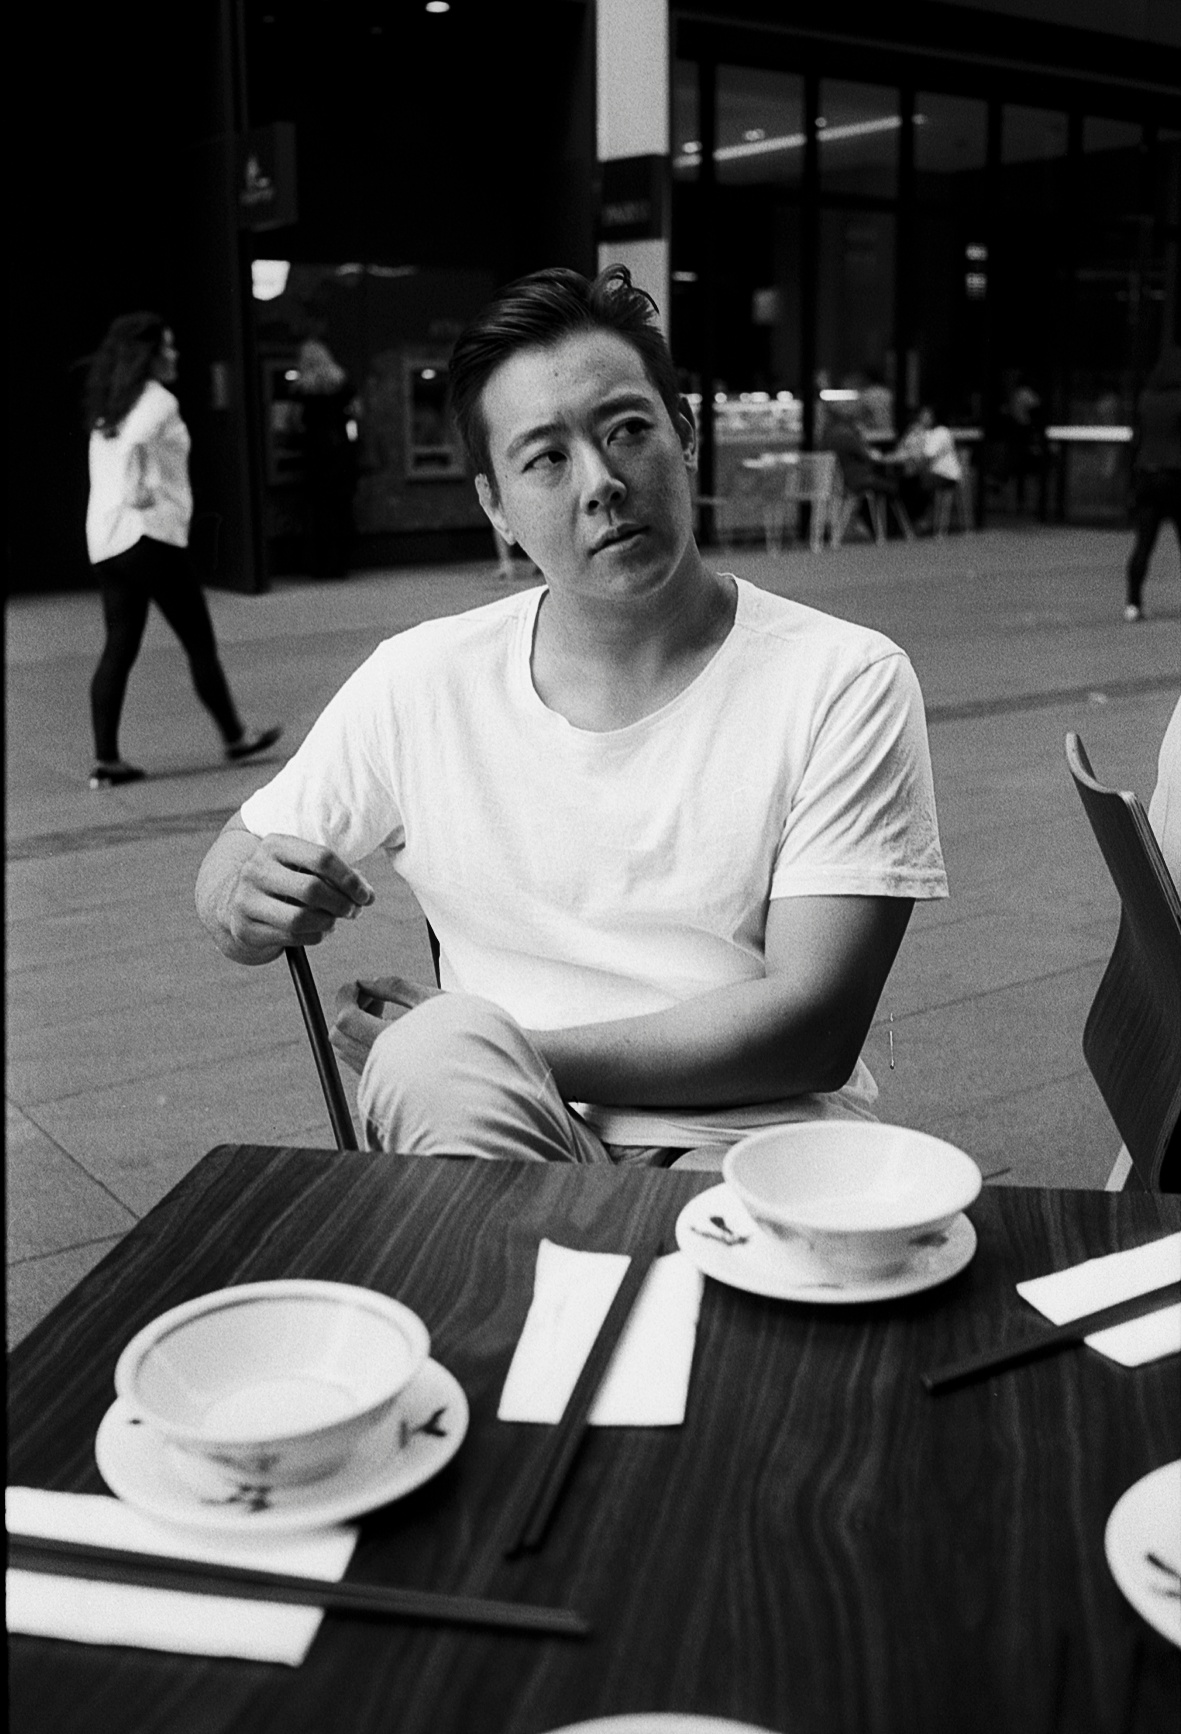 A film shot of our CEO & Co-founder, Tony Wu